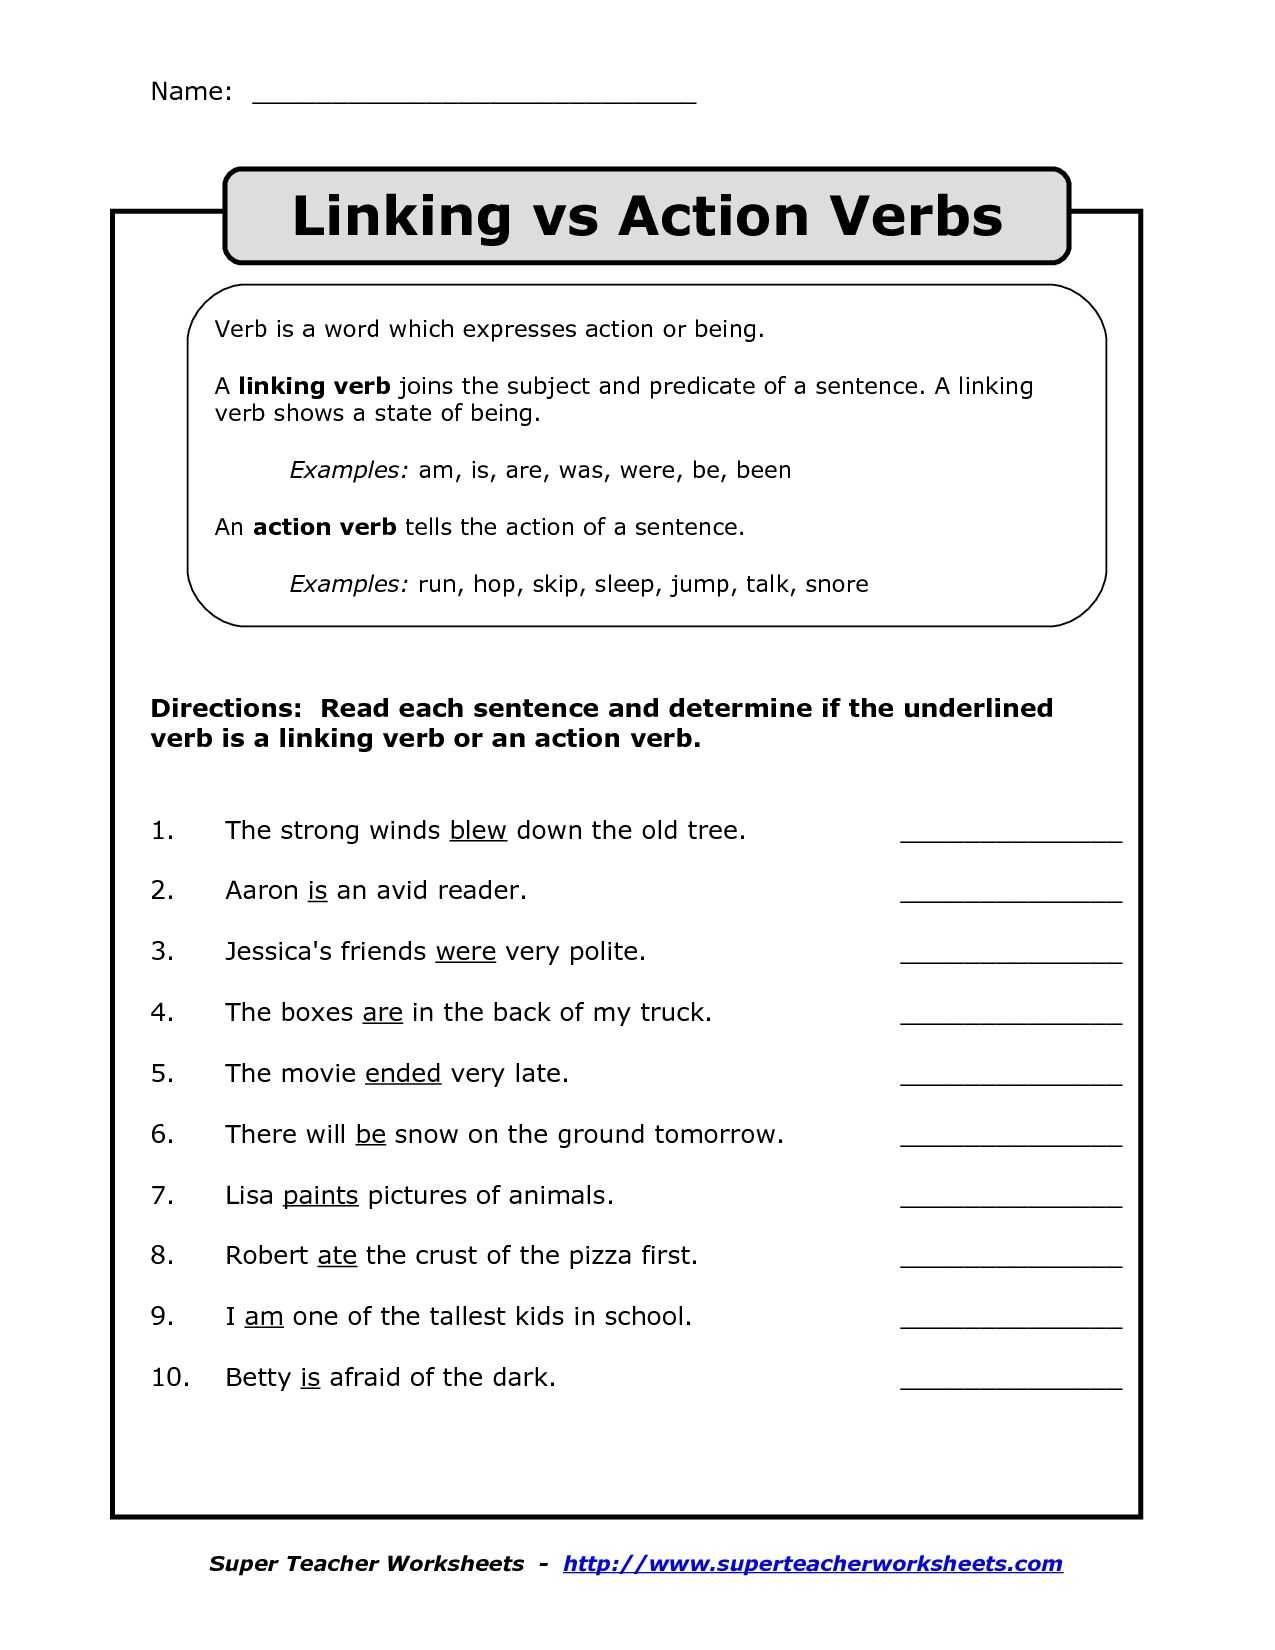 Subject Verb Agreement Practice Worksheets with Study Action and Linking Verbs Worksheet 5th Grade Danasrhgtop